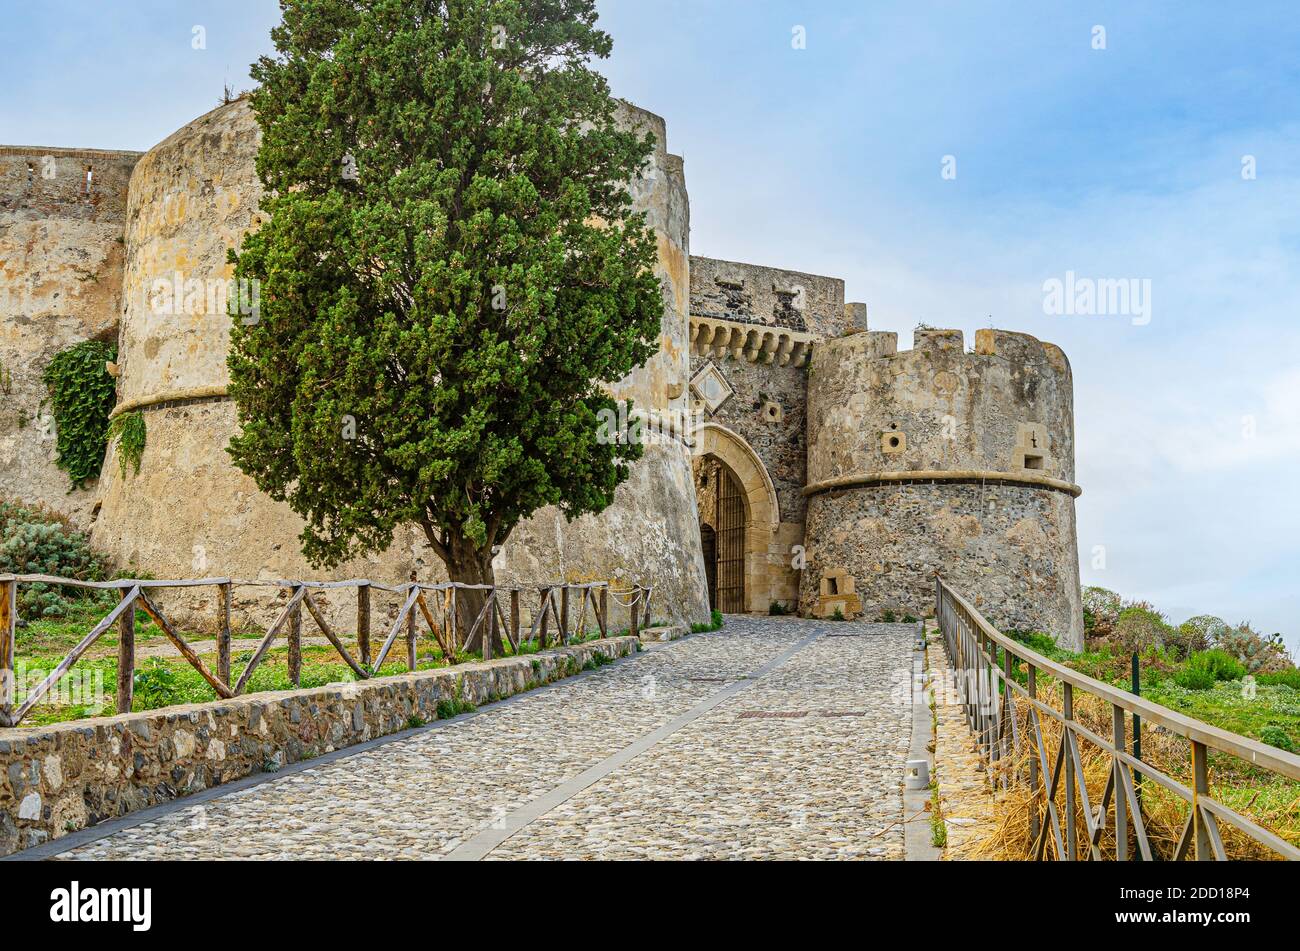 facade and entrance to the medieval castle of milazzo in sicily on the tyrrhenian sea. Italy. Stock Photo